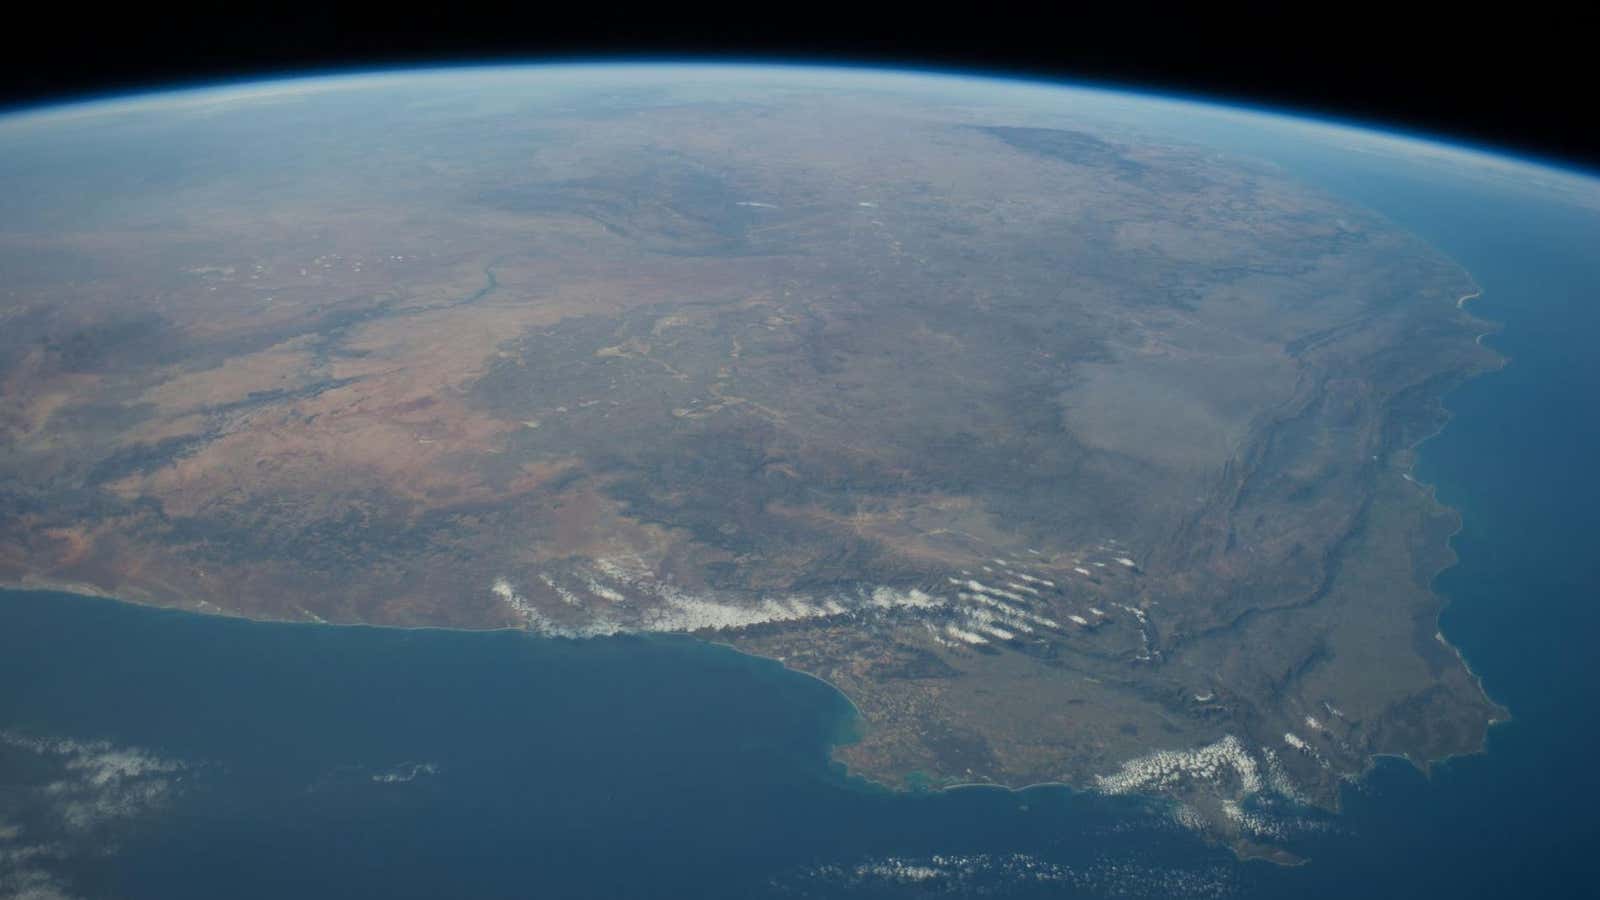 Clues from a mass extinction in South Africa could help climate change researchers better estimate how certain parts of the planet might react as water becomes scarcer.